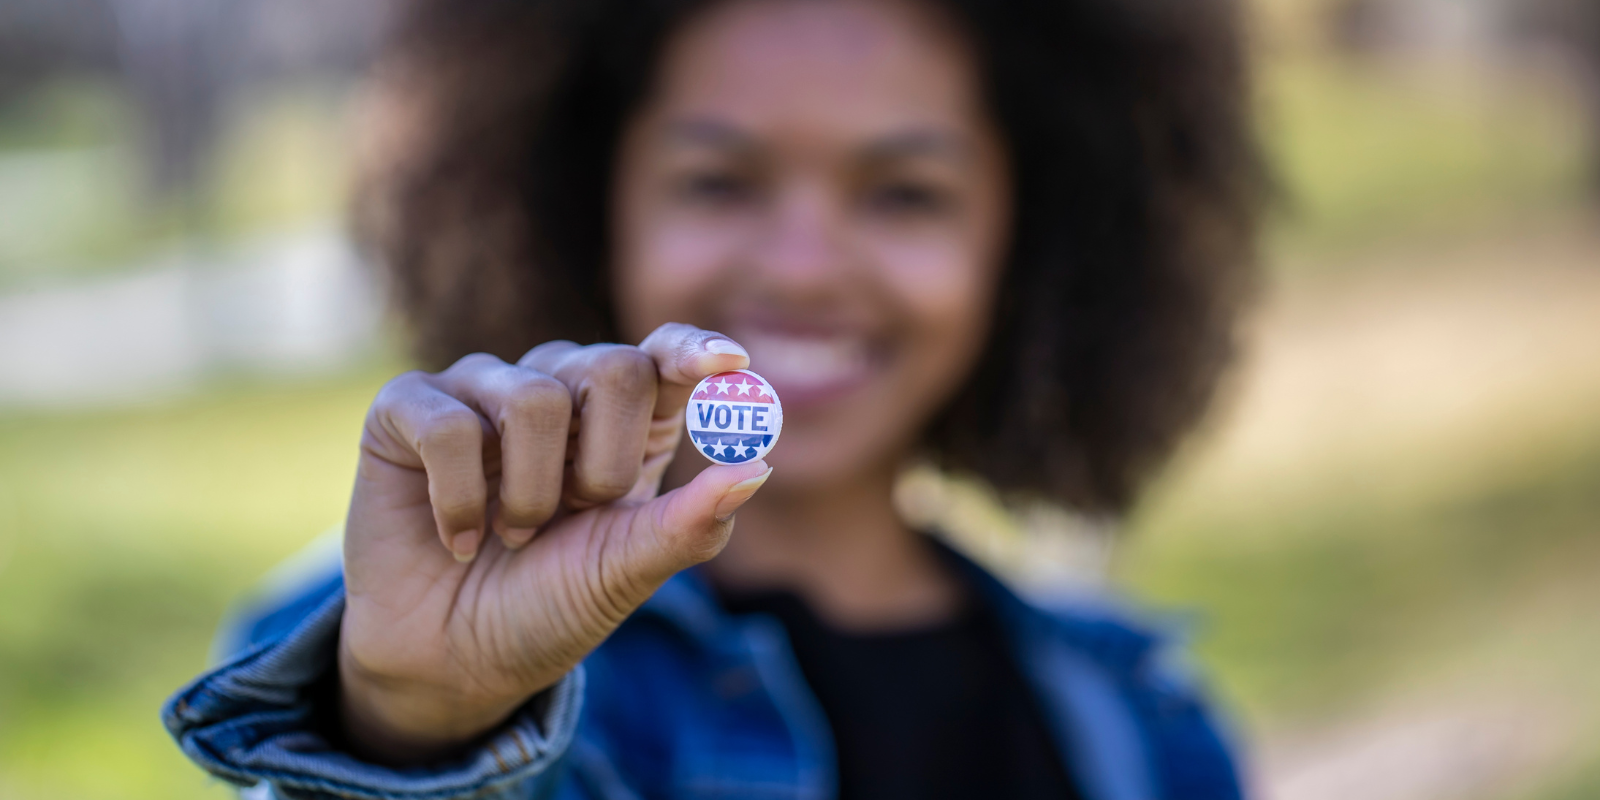 A black woman holding a button that reads "vote".